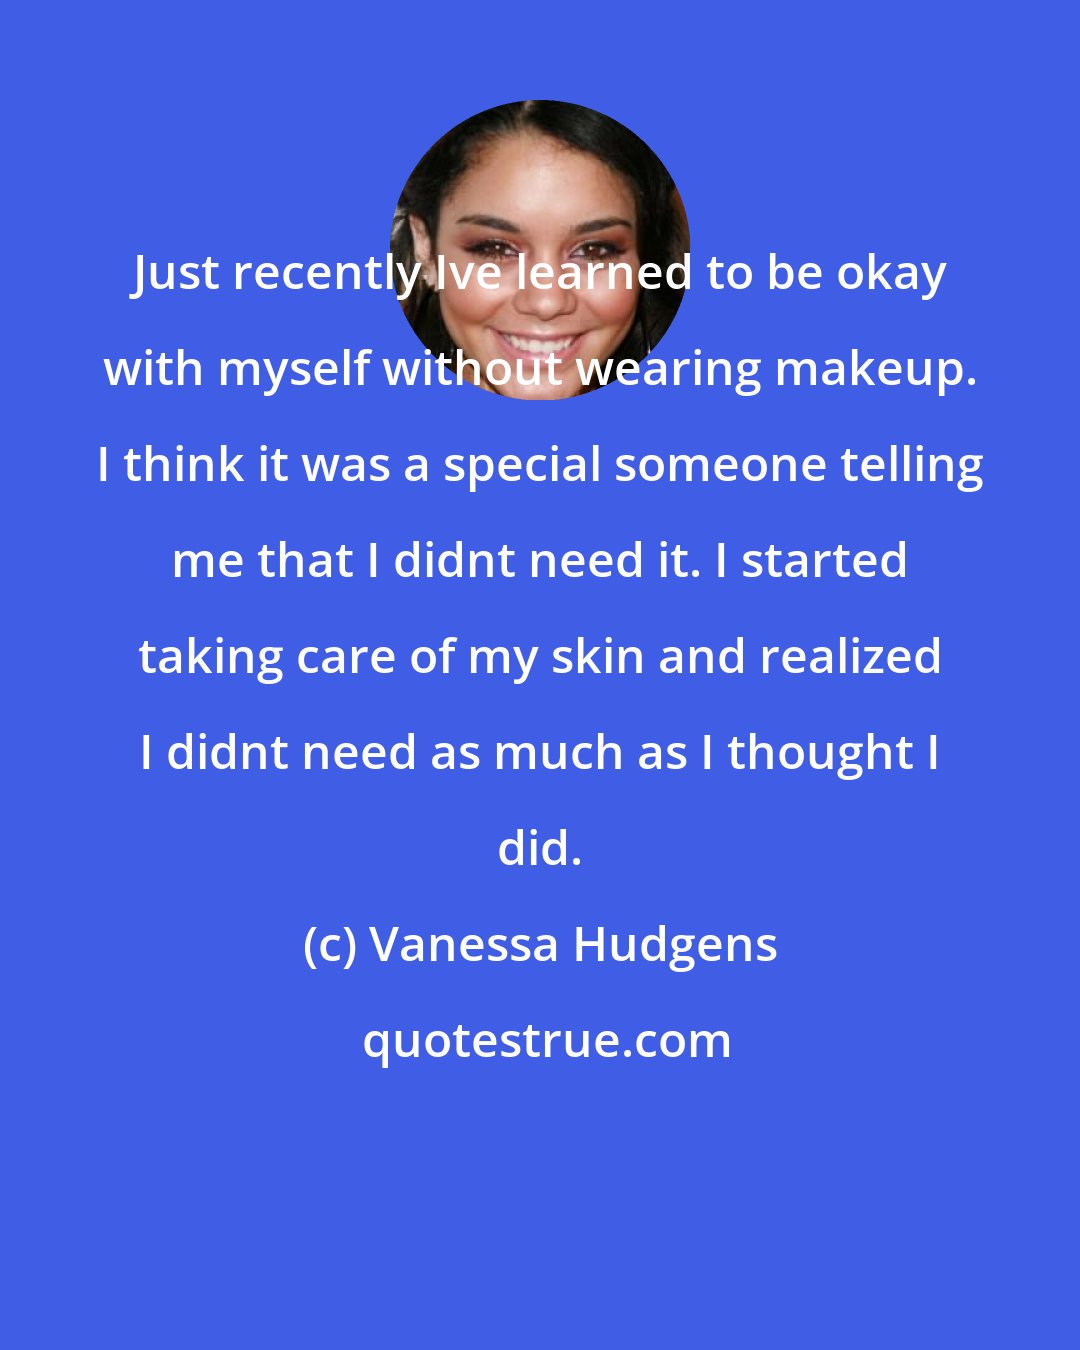 Vanessa Hudgens: Just recently Ive learned to be okay with myself without wearing makeup. I think it was a special someone telling me that I didnt need it. I started taking care of my skin and realized I didnt need as much as I thought I did.